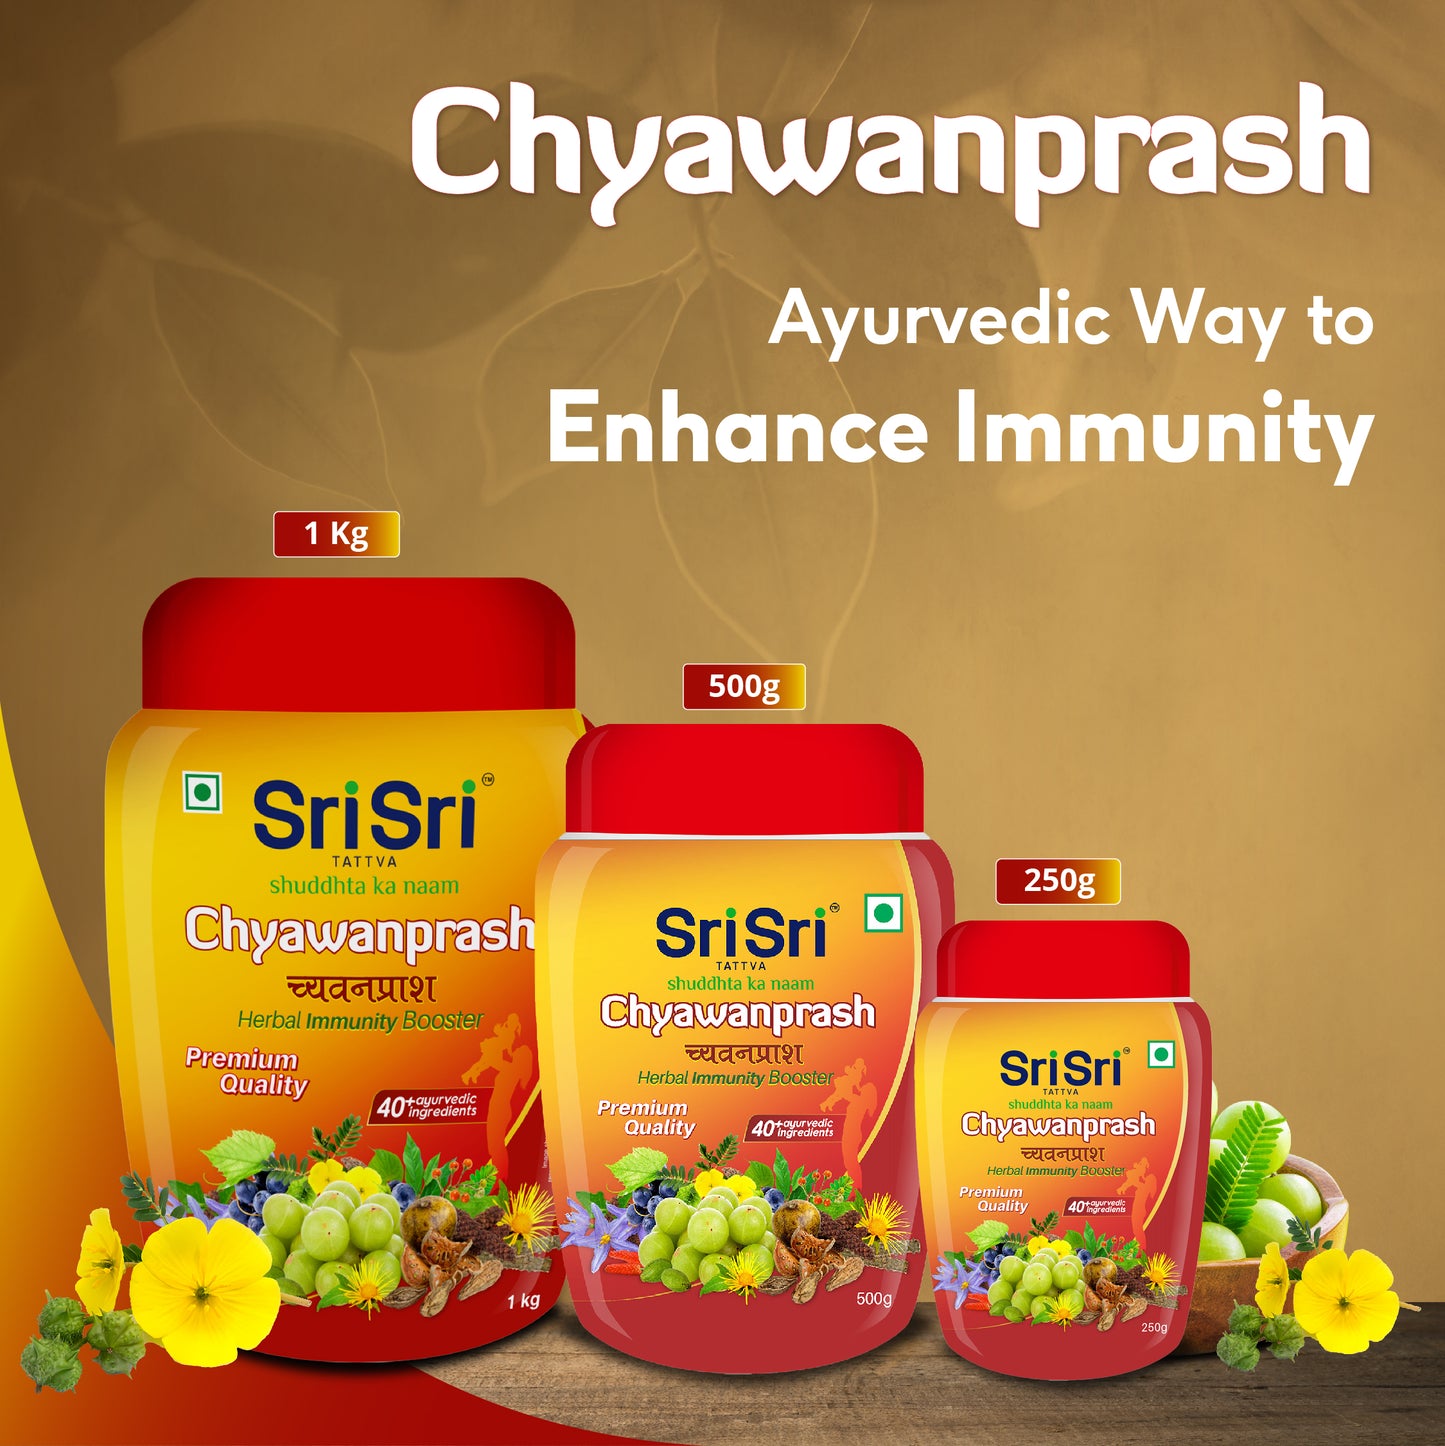 Chyawanprash - Herbal Immunity Booster with 40+ Ayurvedic Ingredients for Better Strength and Stamina, 1 kg